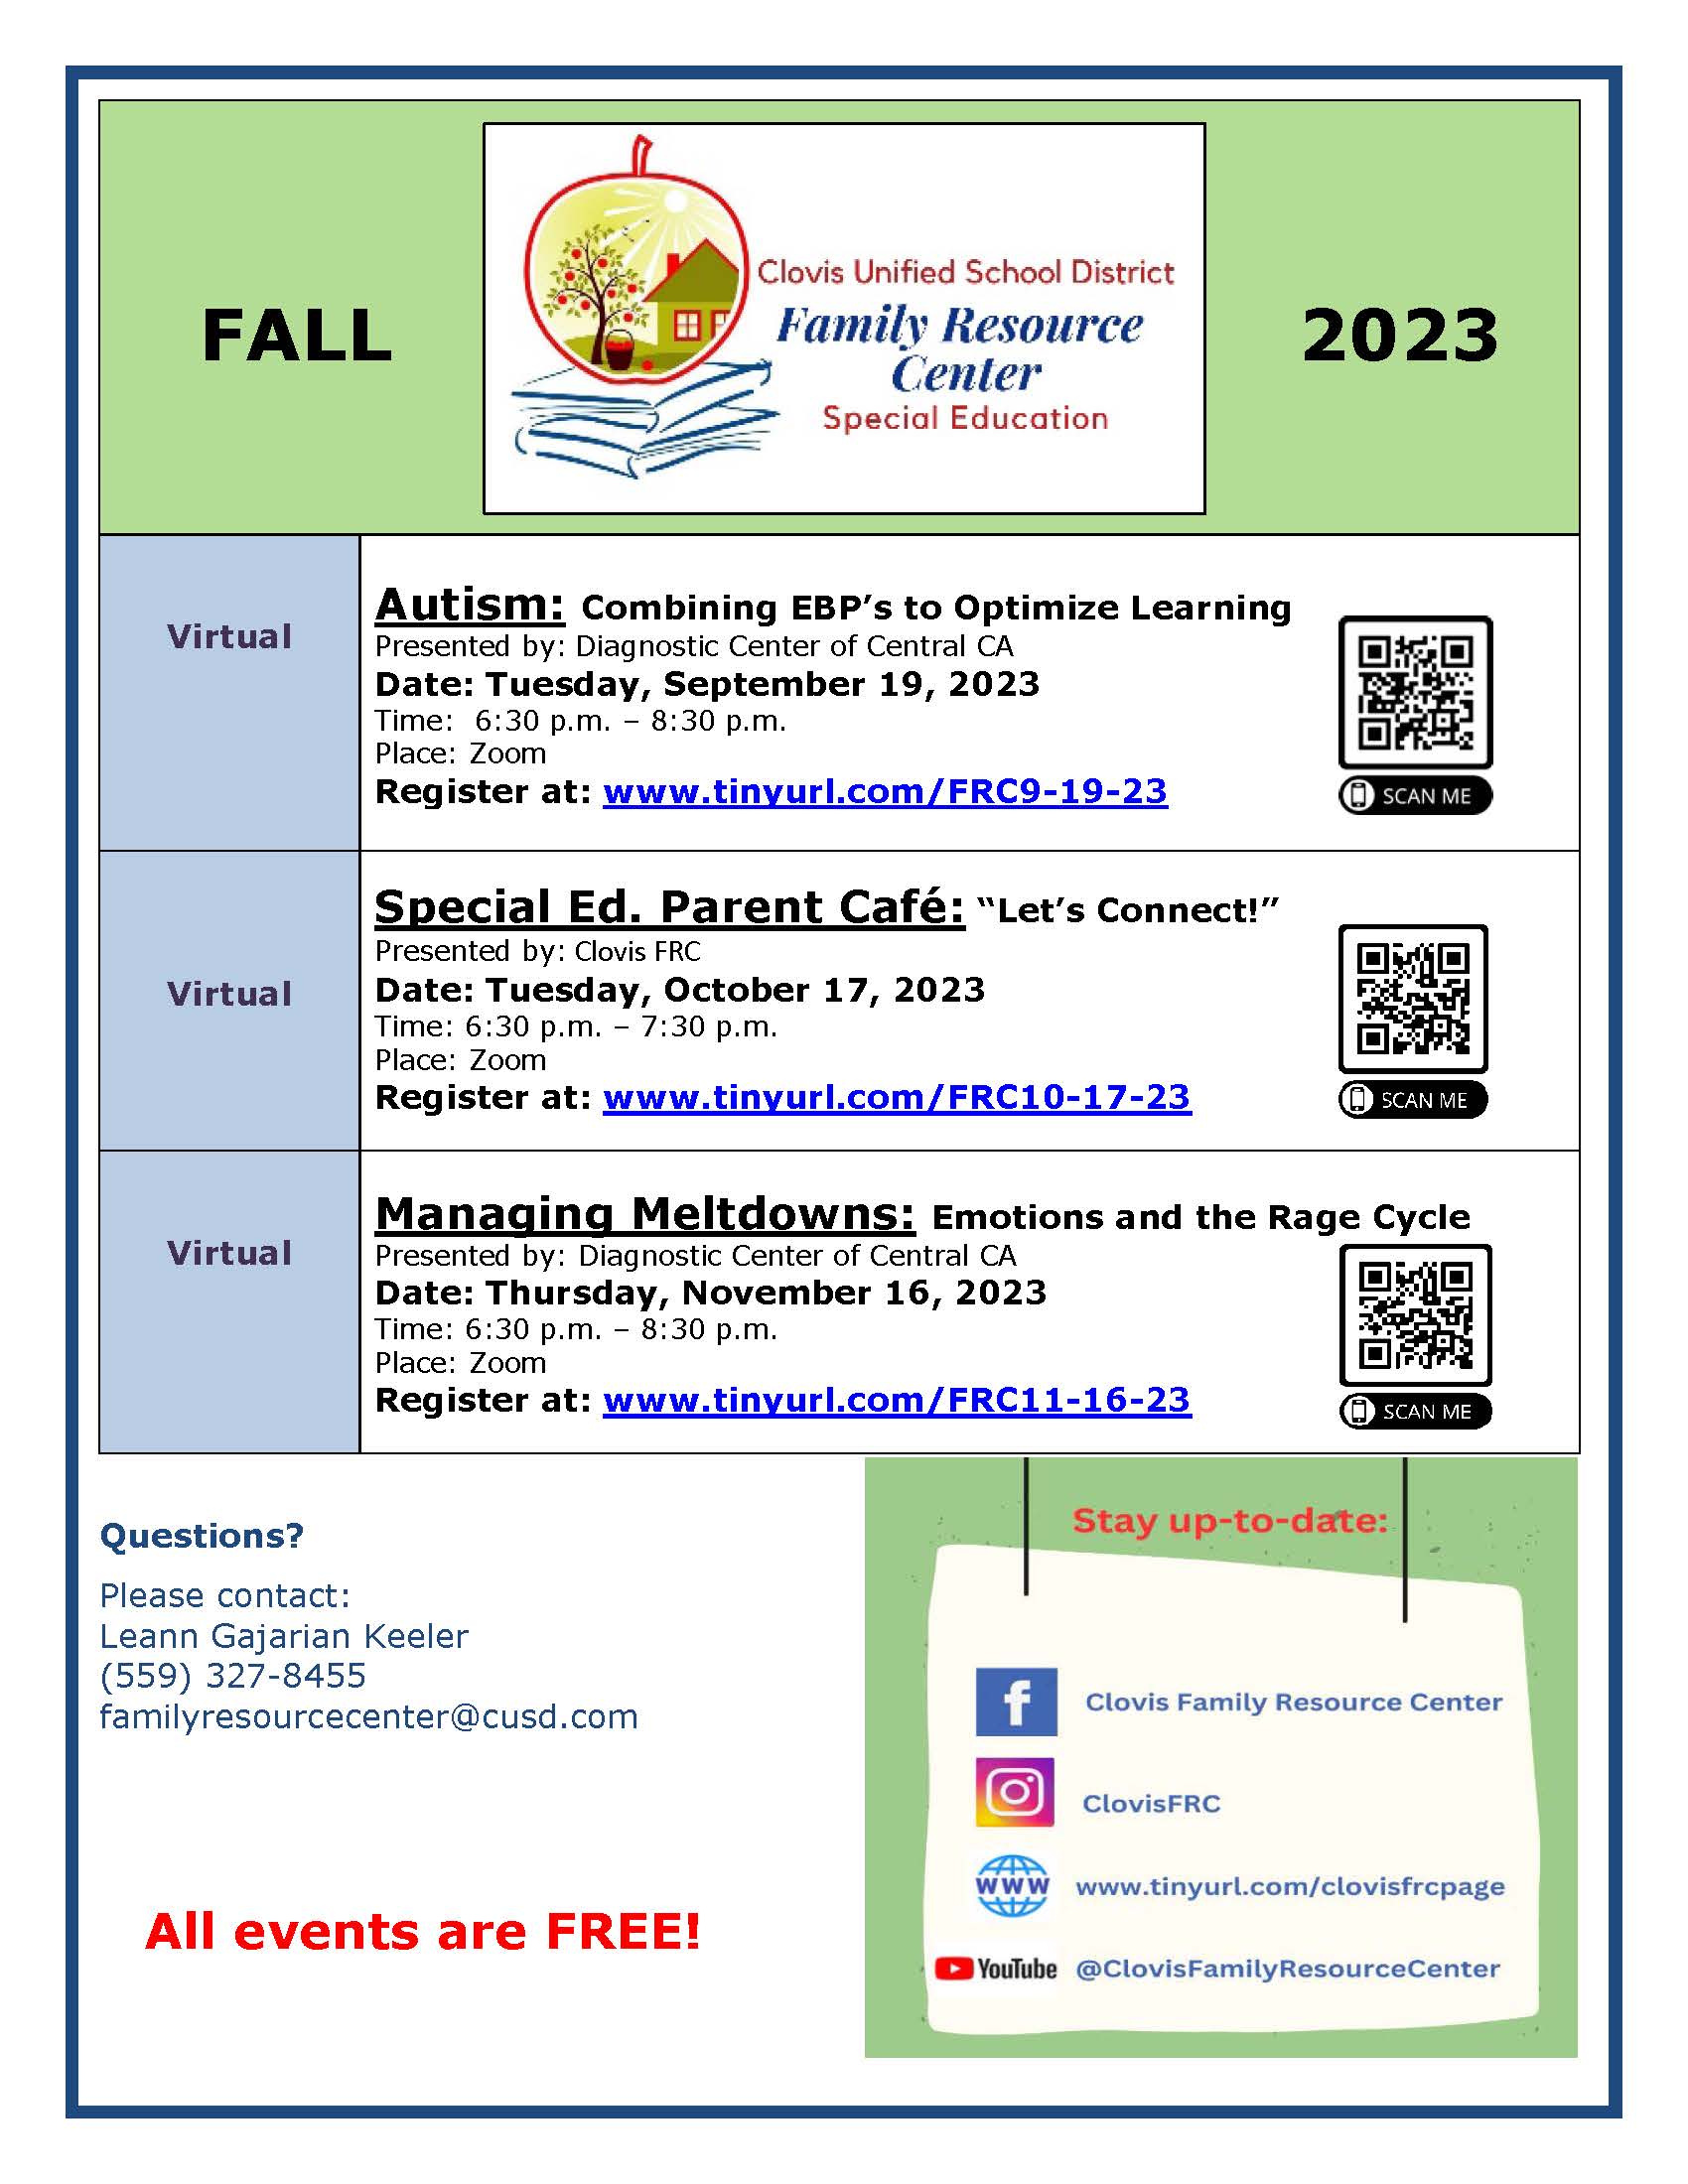 Image of Fall 2023 FRC events calendar. RTF version available for download on this page.